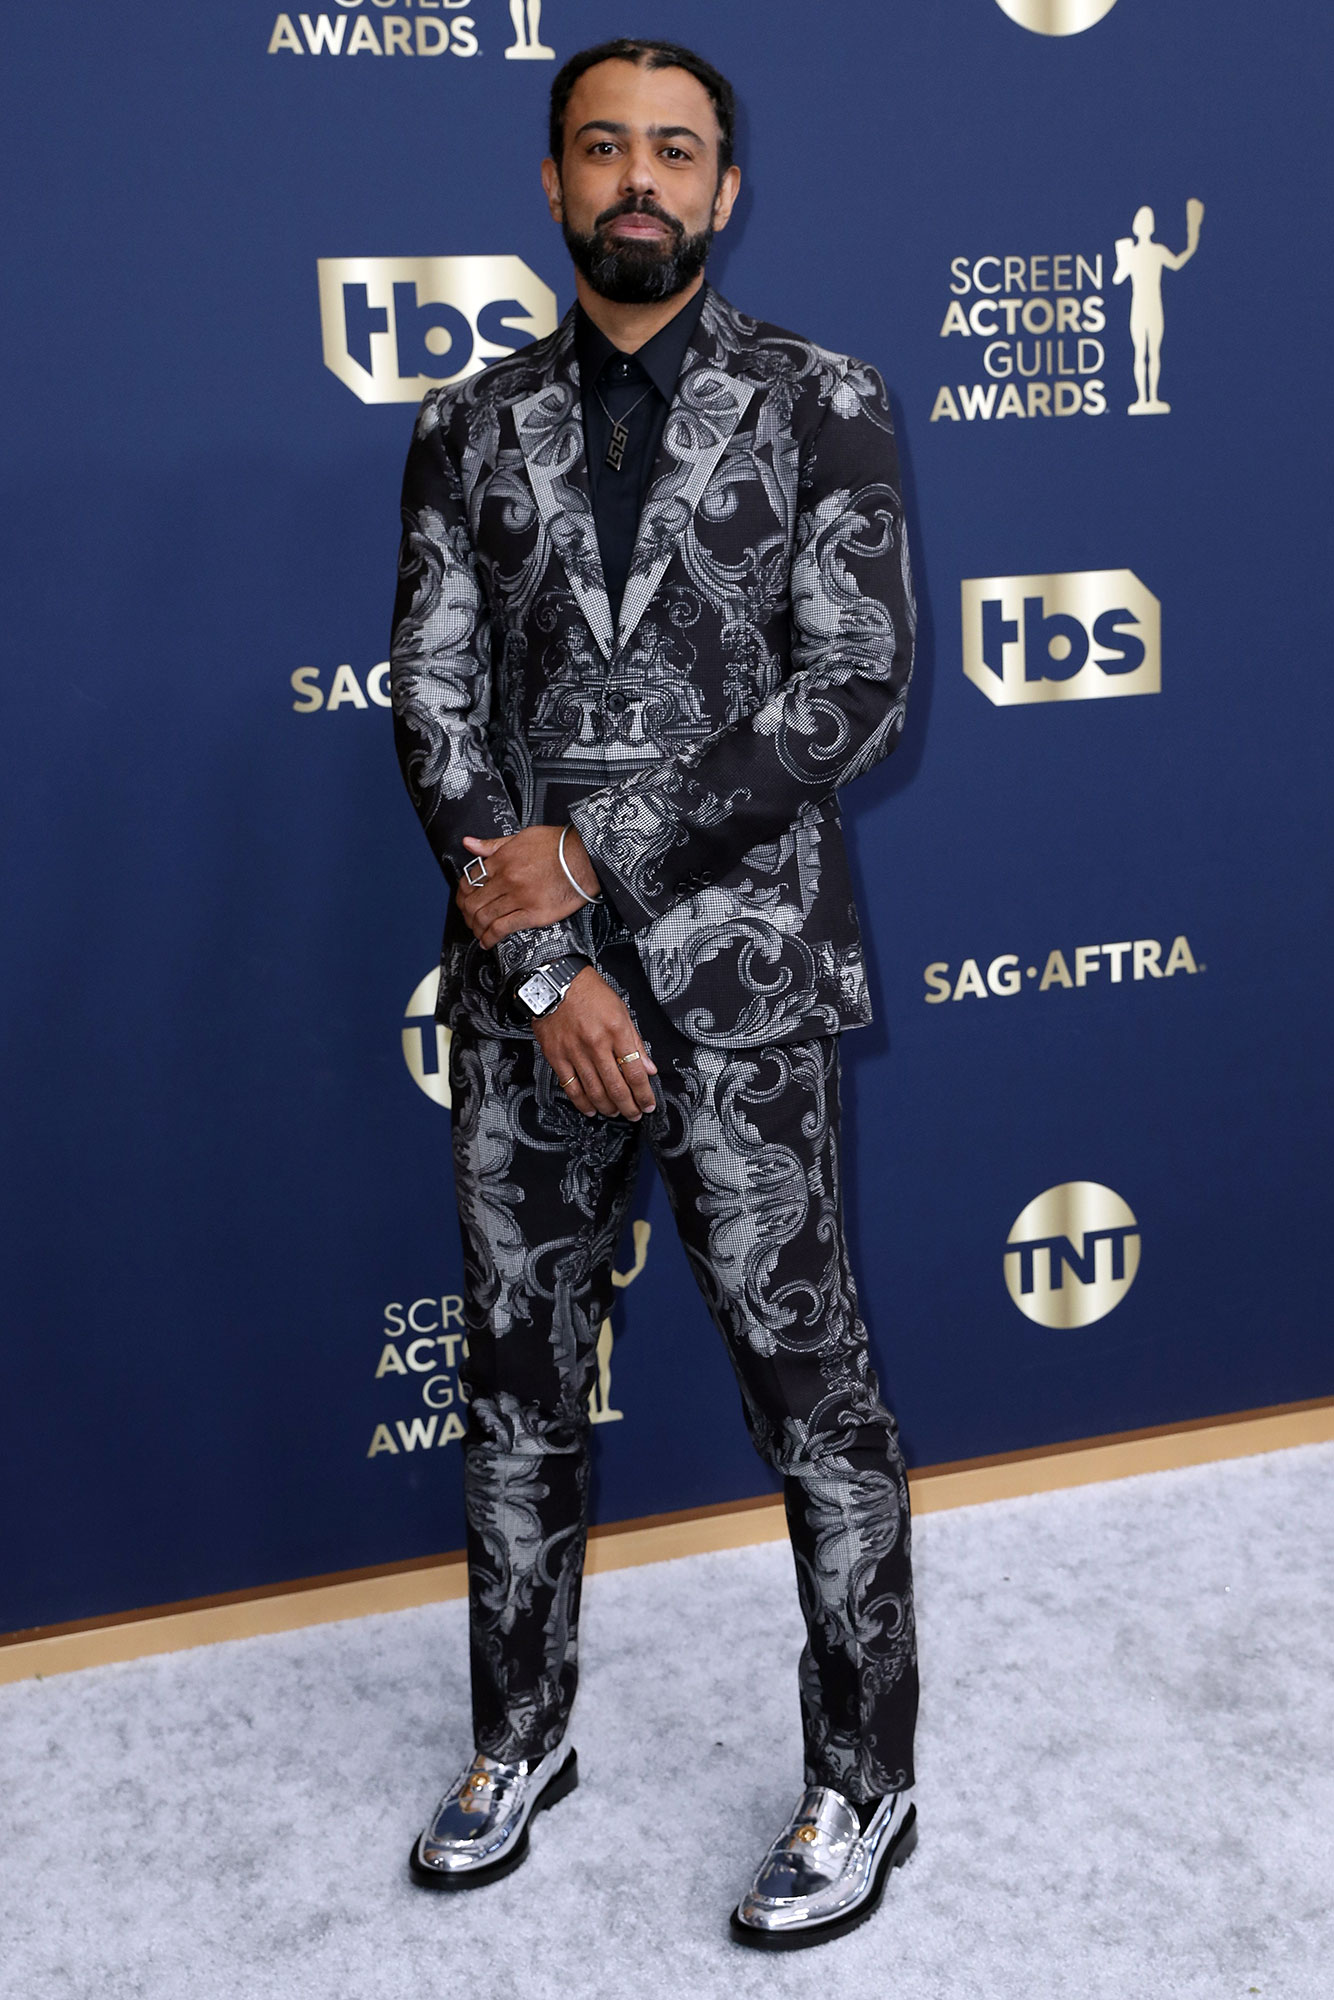 Daveed Diggs The Best Dressed Hottest Men at the 2022 SAG Awards